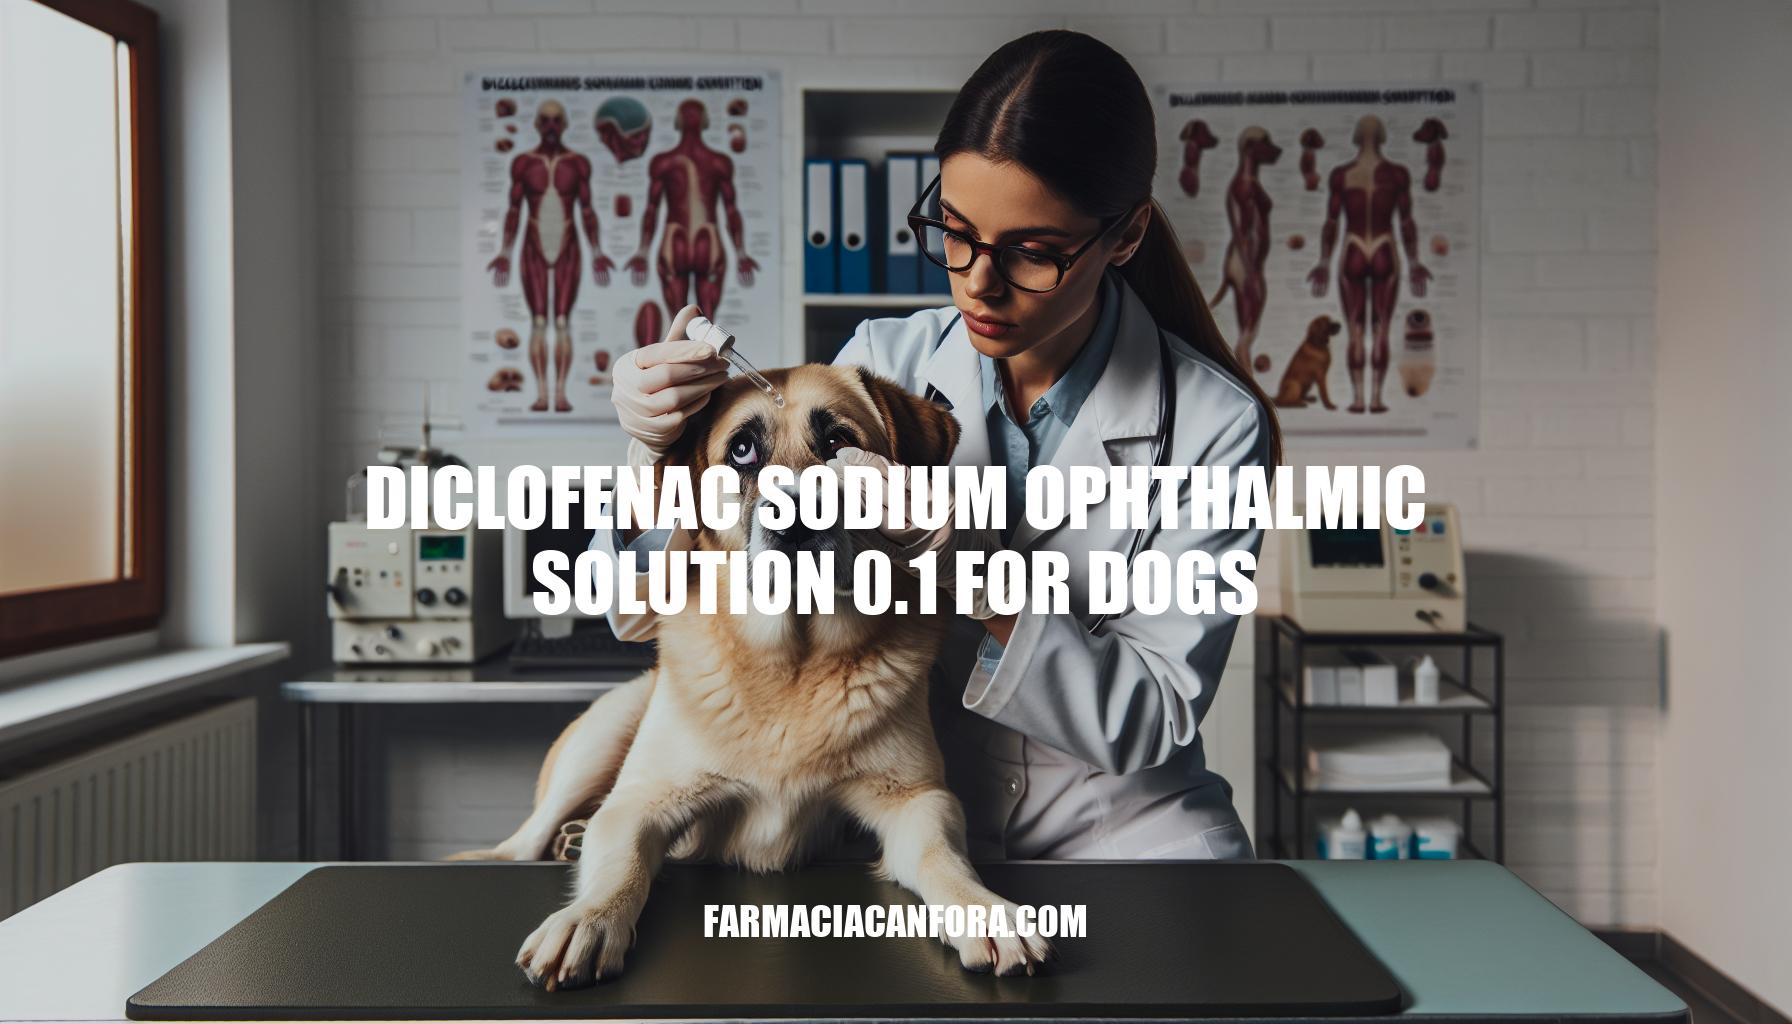 Guide to Using Diclofenac Sodium Ophthalmic Solution 0.1 for Dogs